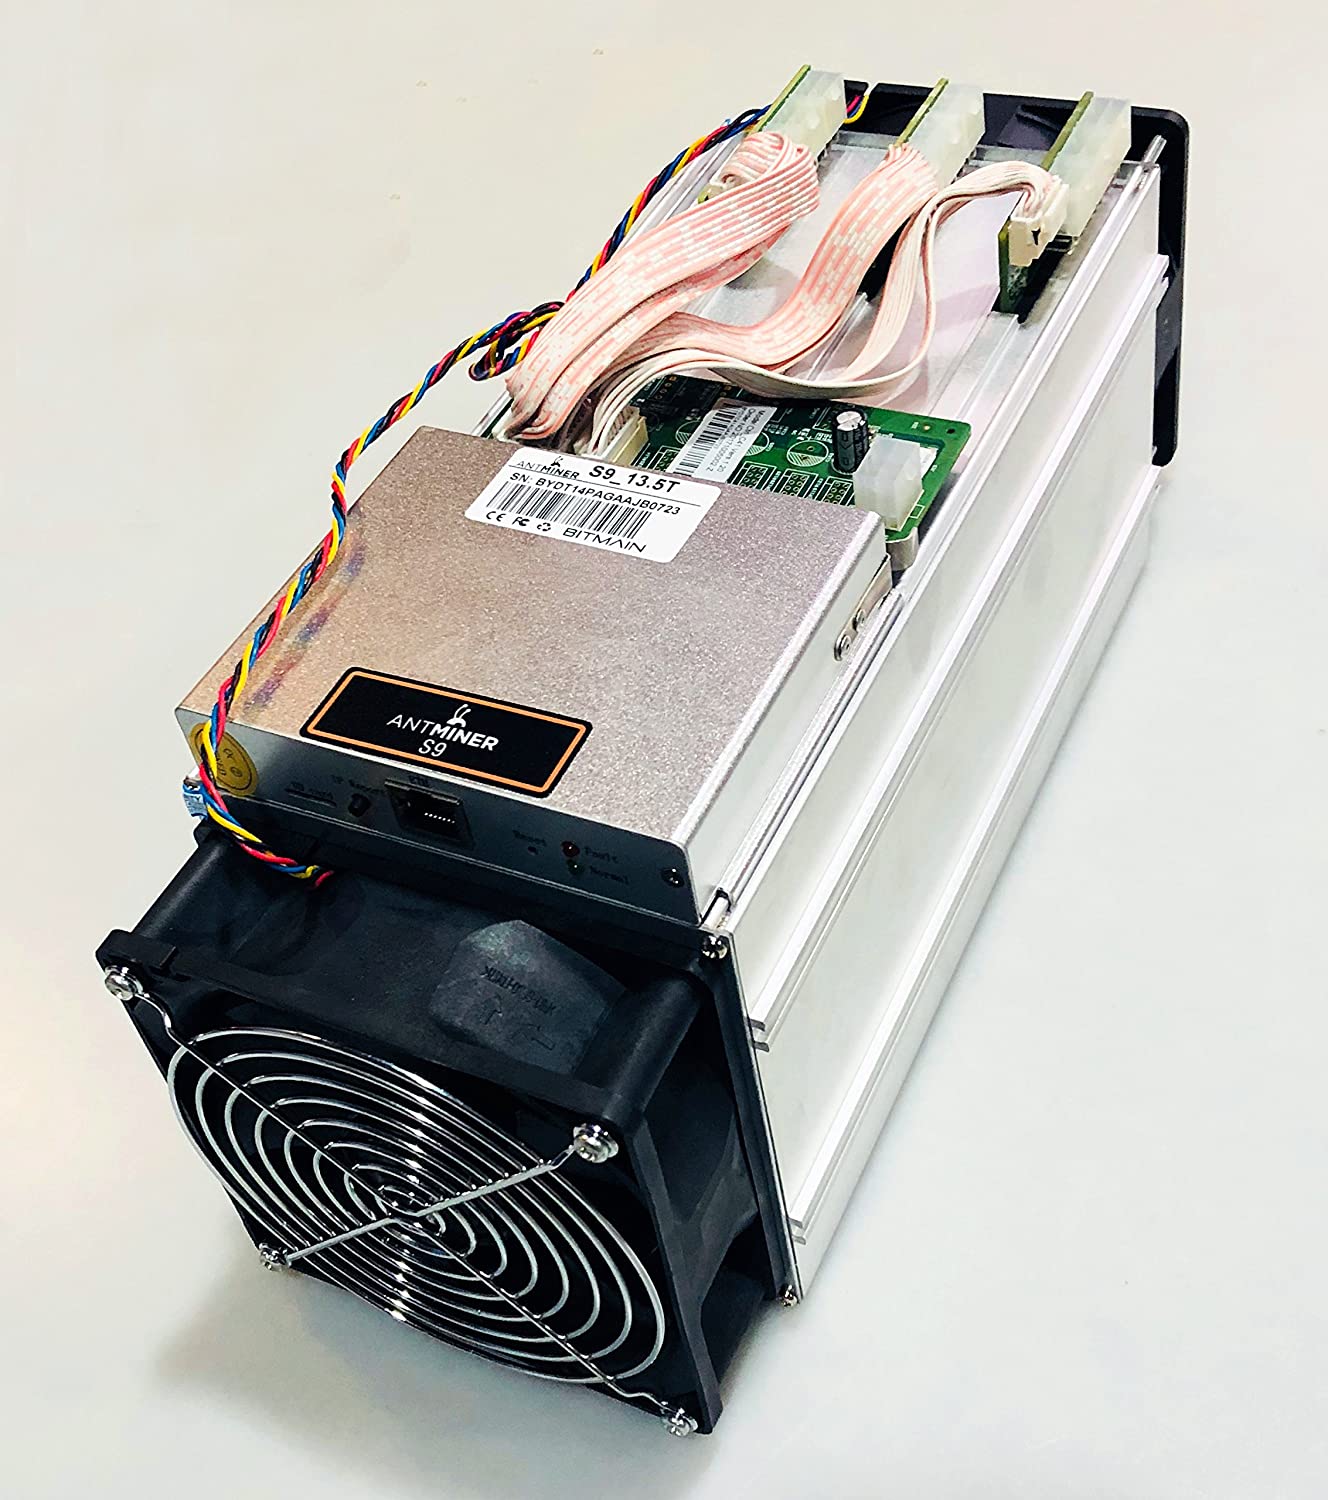 mining bitcoin cash with antminer s9